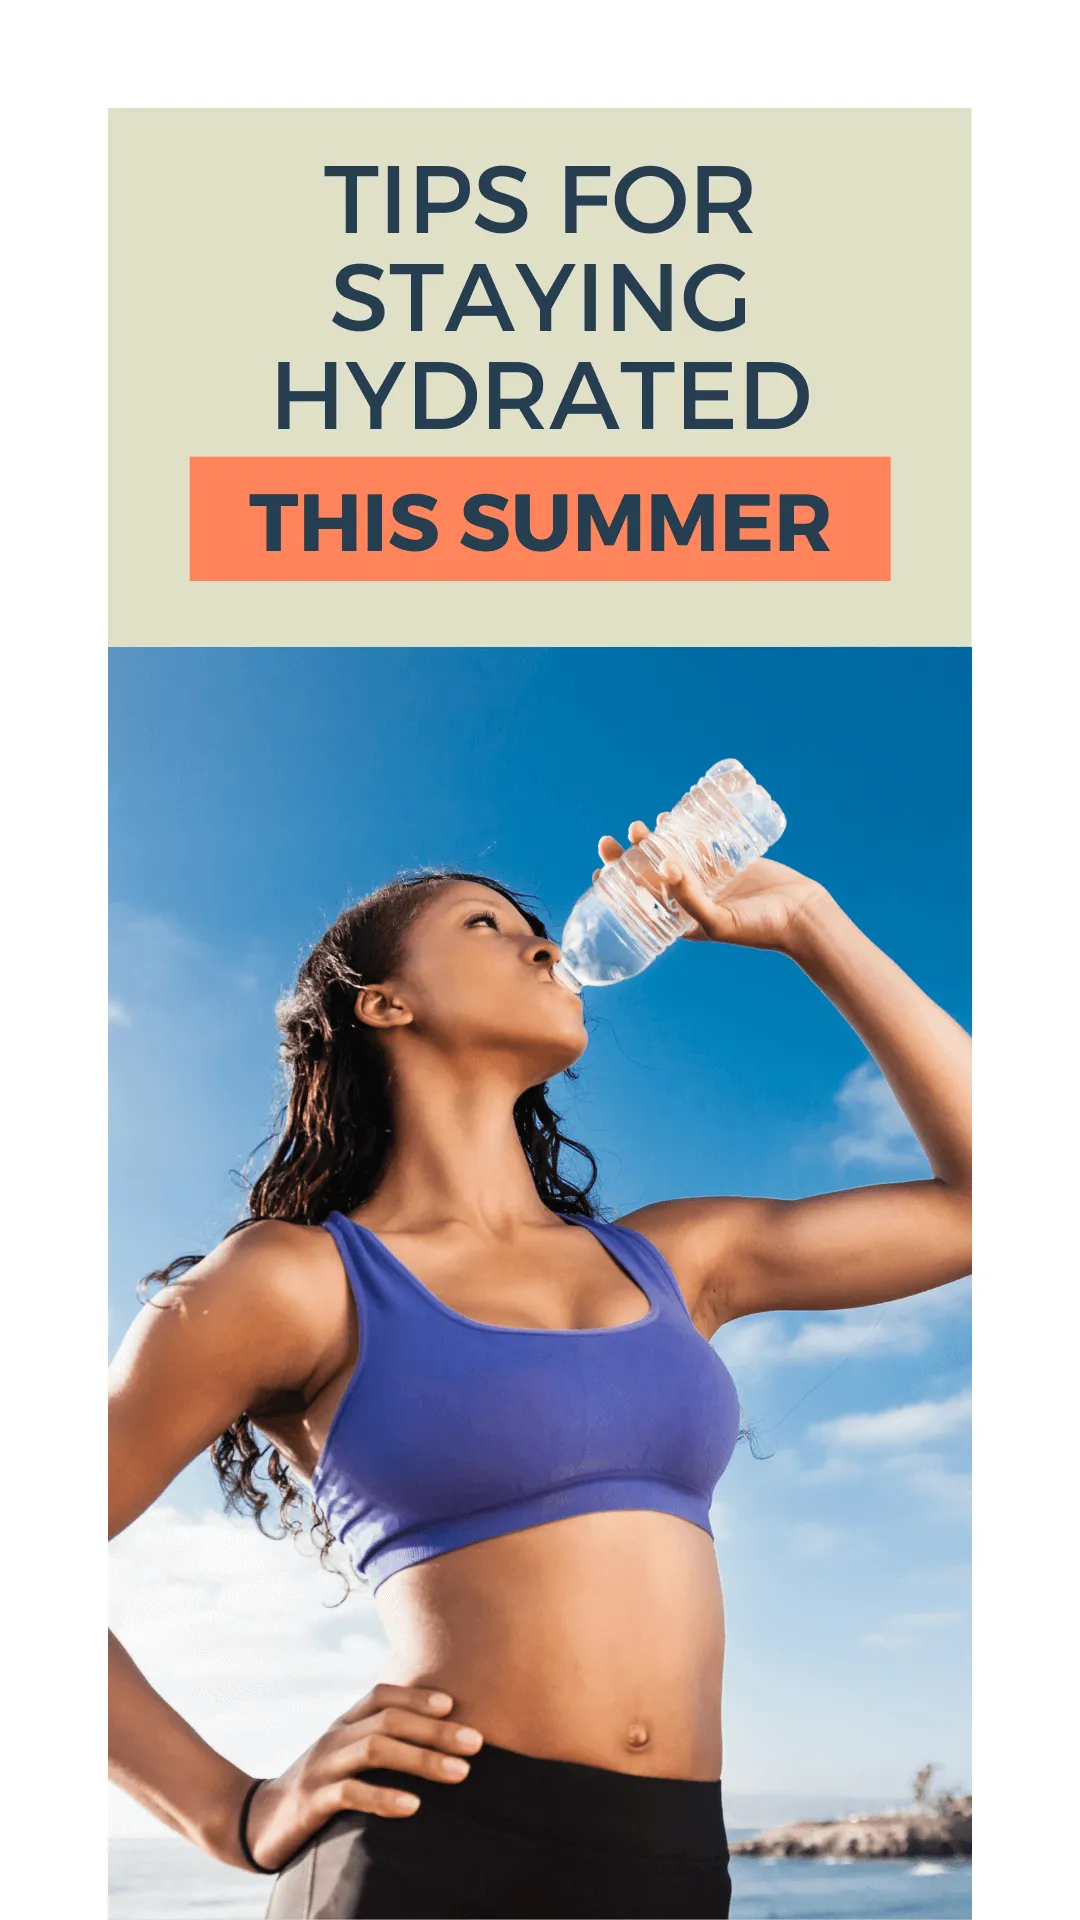 Tips to Stay Hydrated this Summer